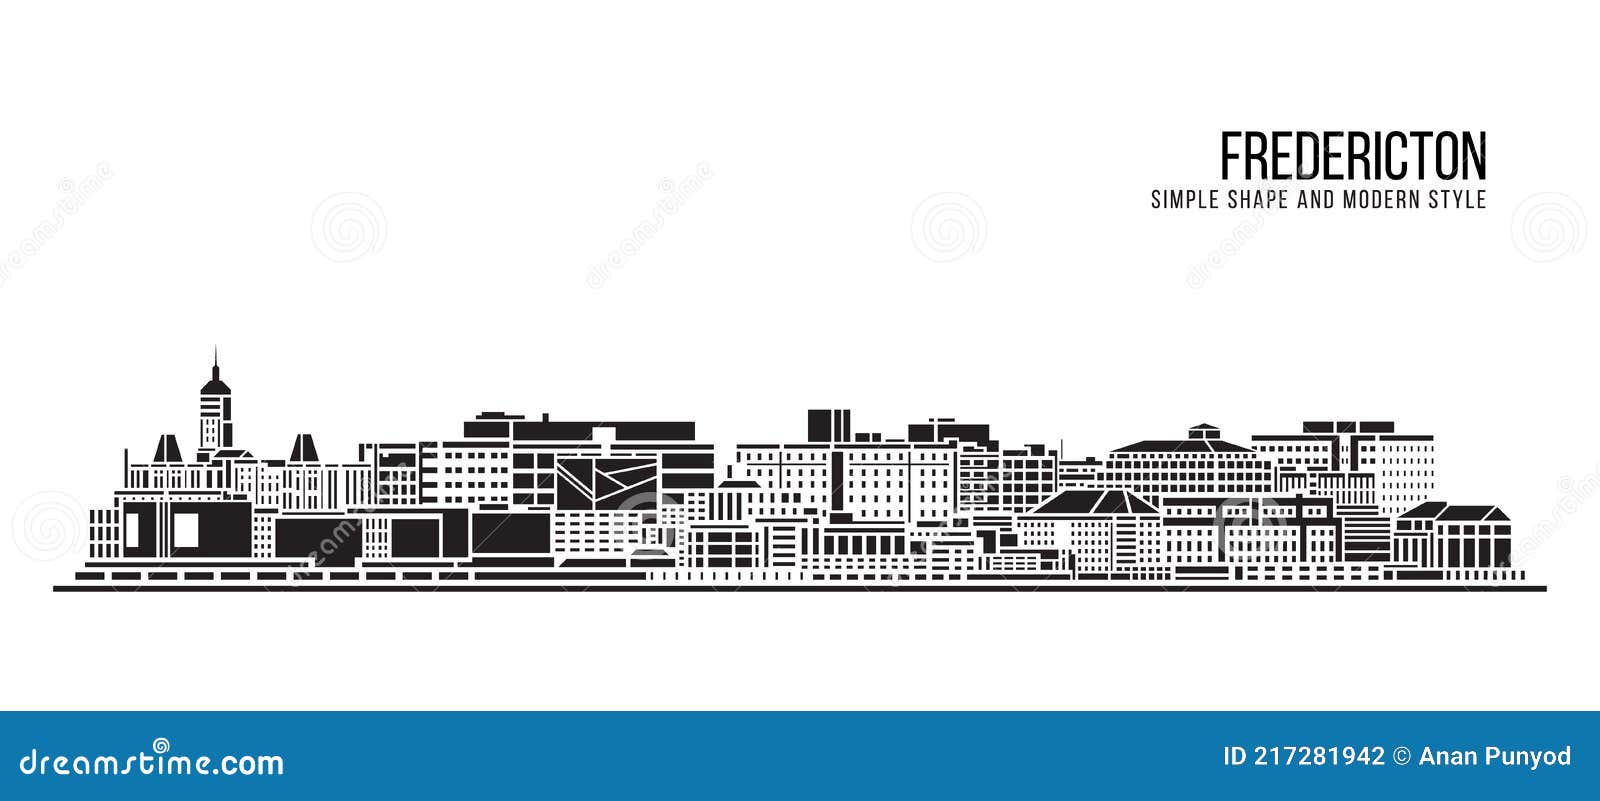 cityscape building abstract simple  and modern style art   - fredericton